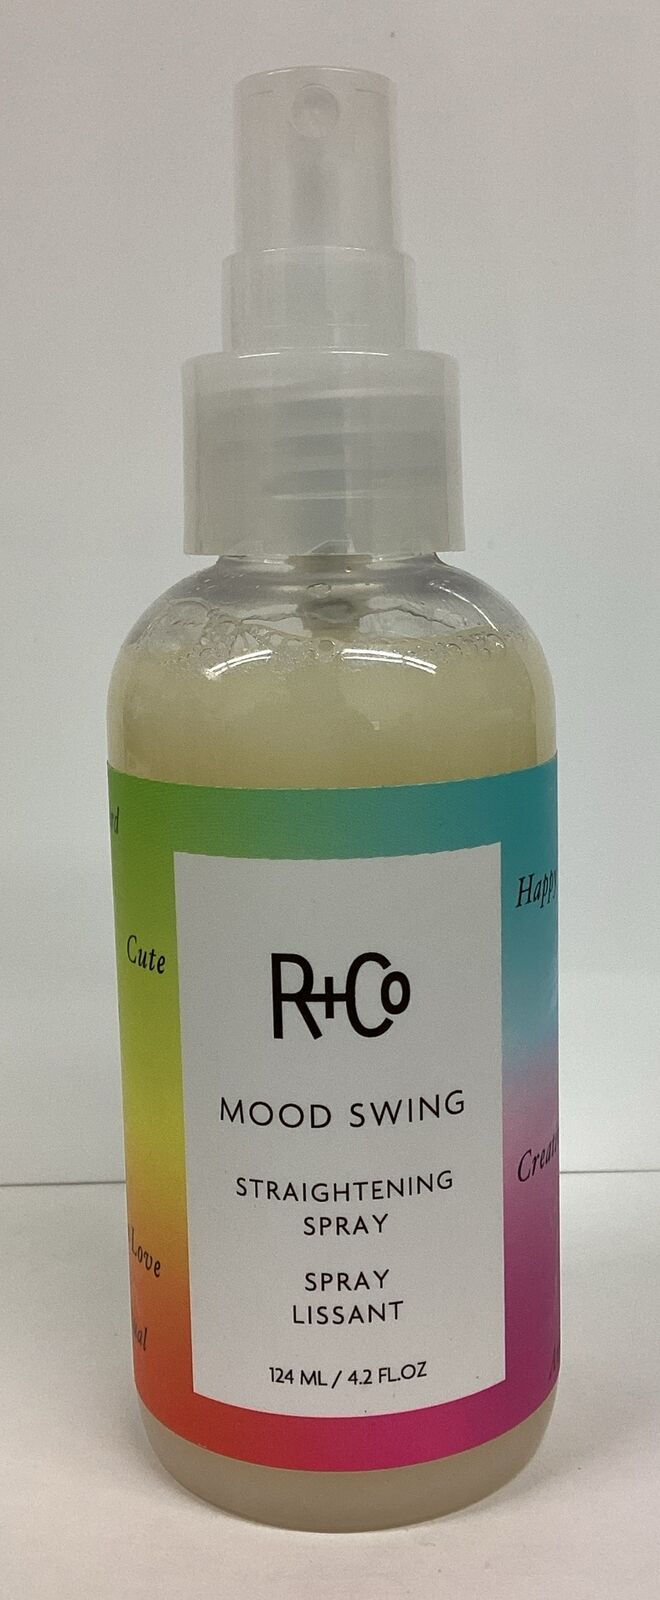 R+Co Mood Swing Straightening Spray 4.2oz  as pictured